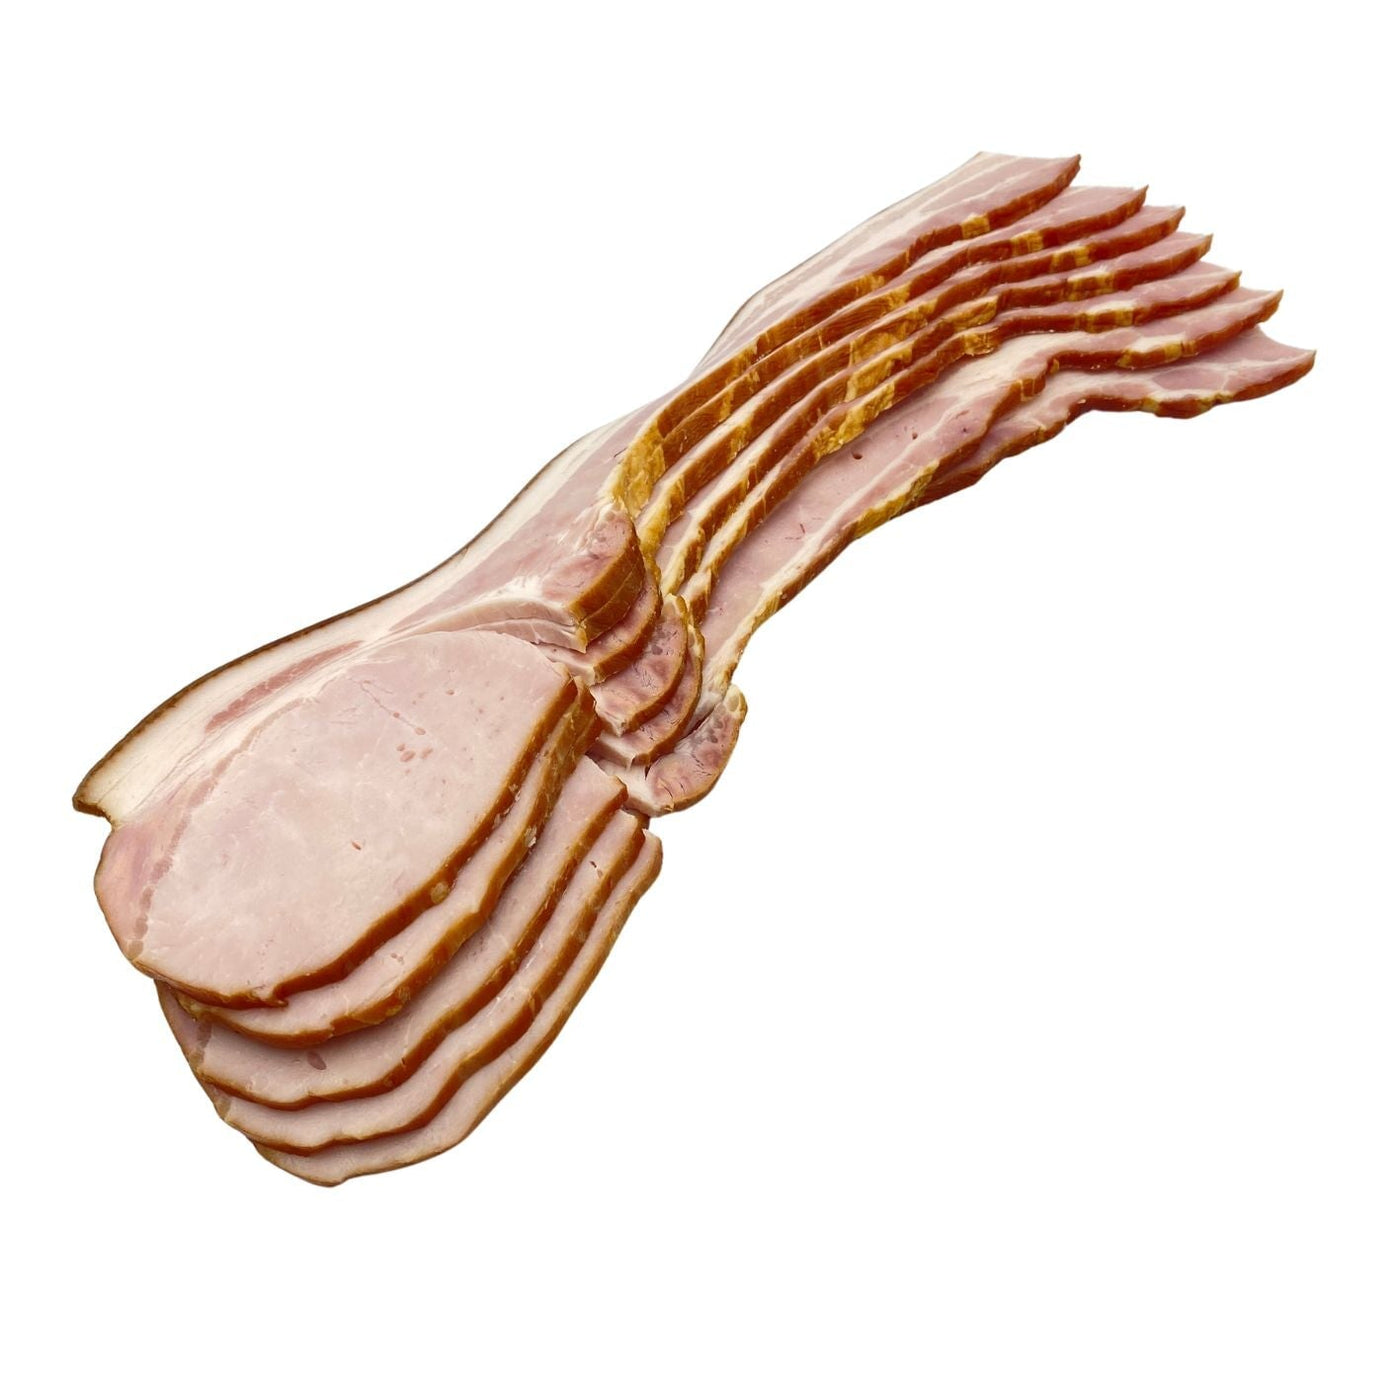 Gilly's Wood Smoked Thick Cut Rasher Bacon | $27.99kg